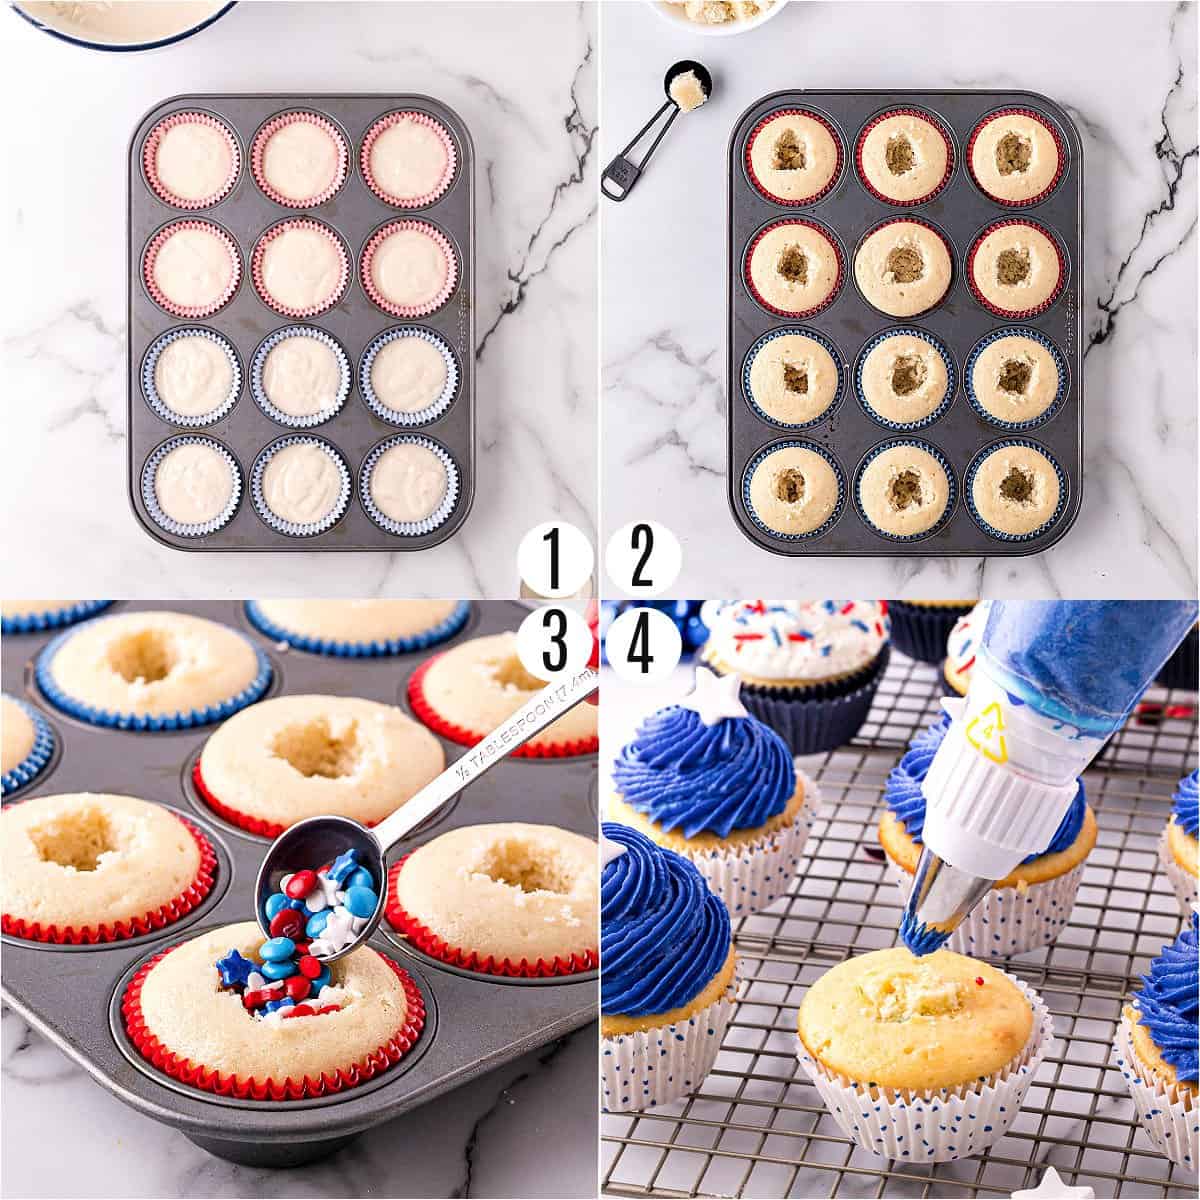 Step by step photos showing how to fill vanilla cupcakes with sprinkles.